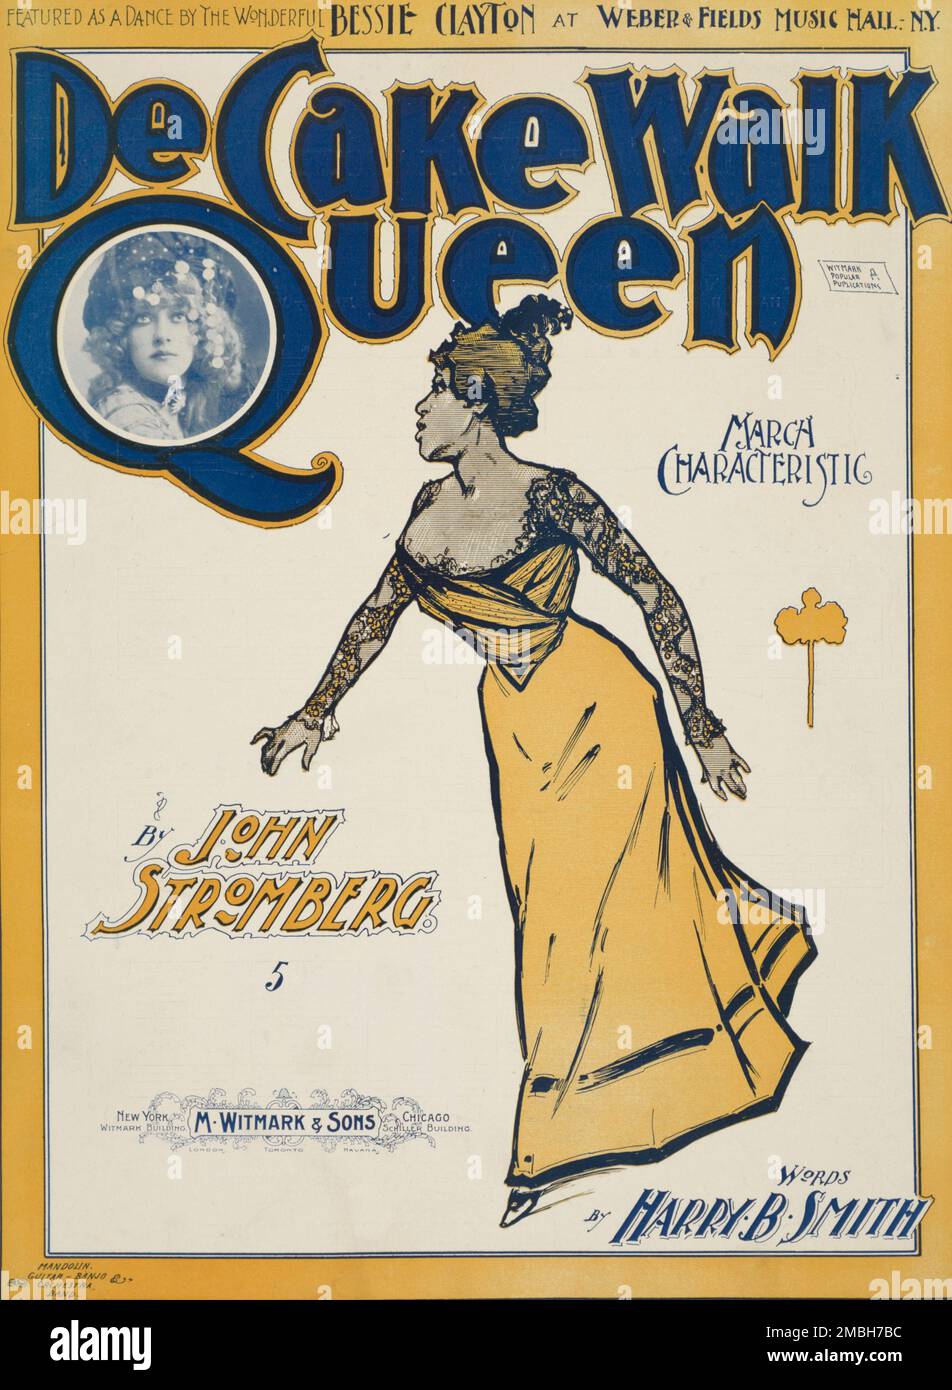 De cake-walk queen', 1900. 'Featured as a Dance by the Wonderful Bessie  Clayton at Weber & Fields Music Hall N.Y.; March Characteristic by John  Stromberg; words by Harry B. Smith'. Portrait photograph